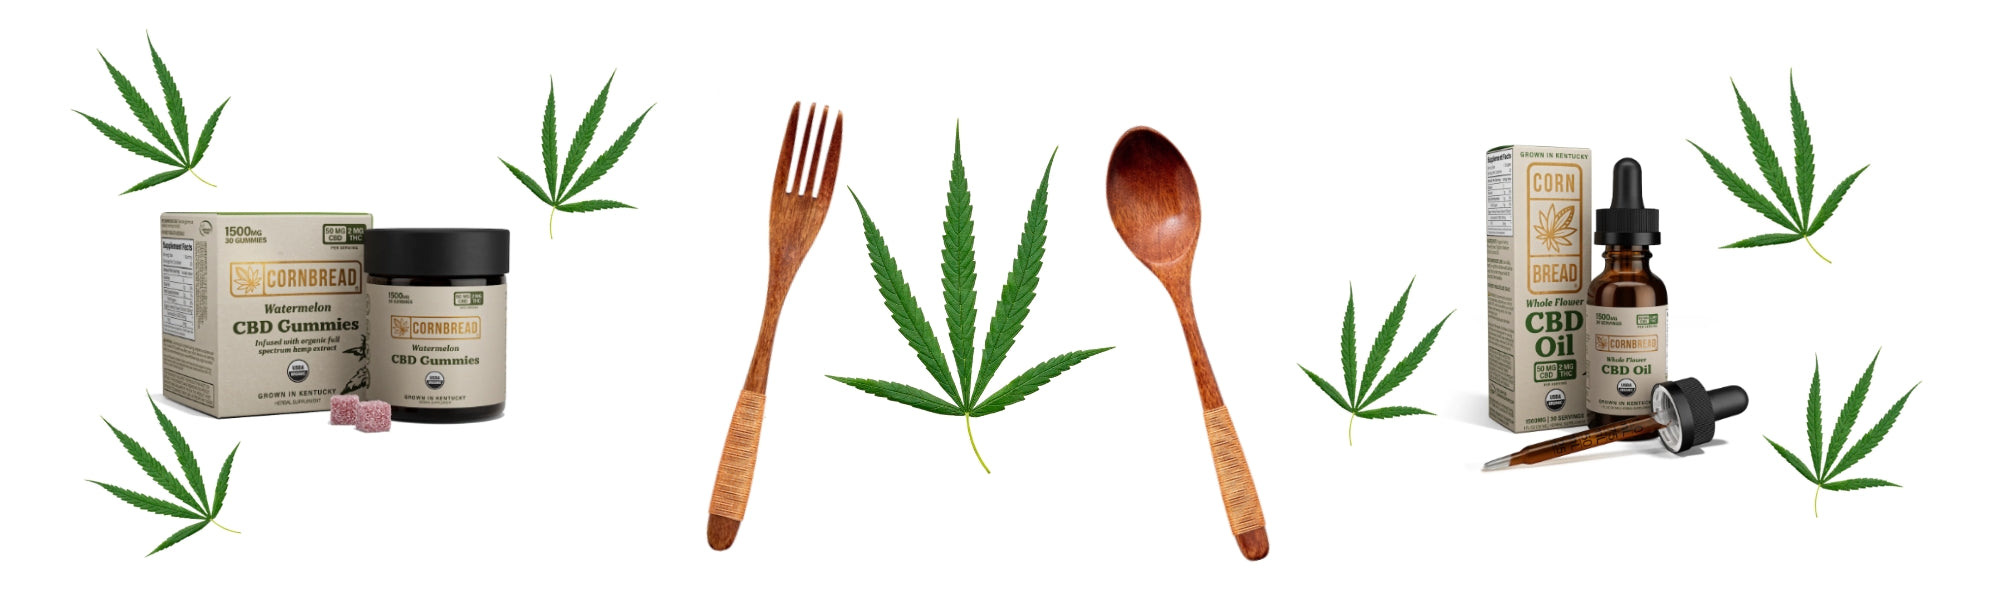 Does CBD Make You Hungry?